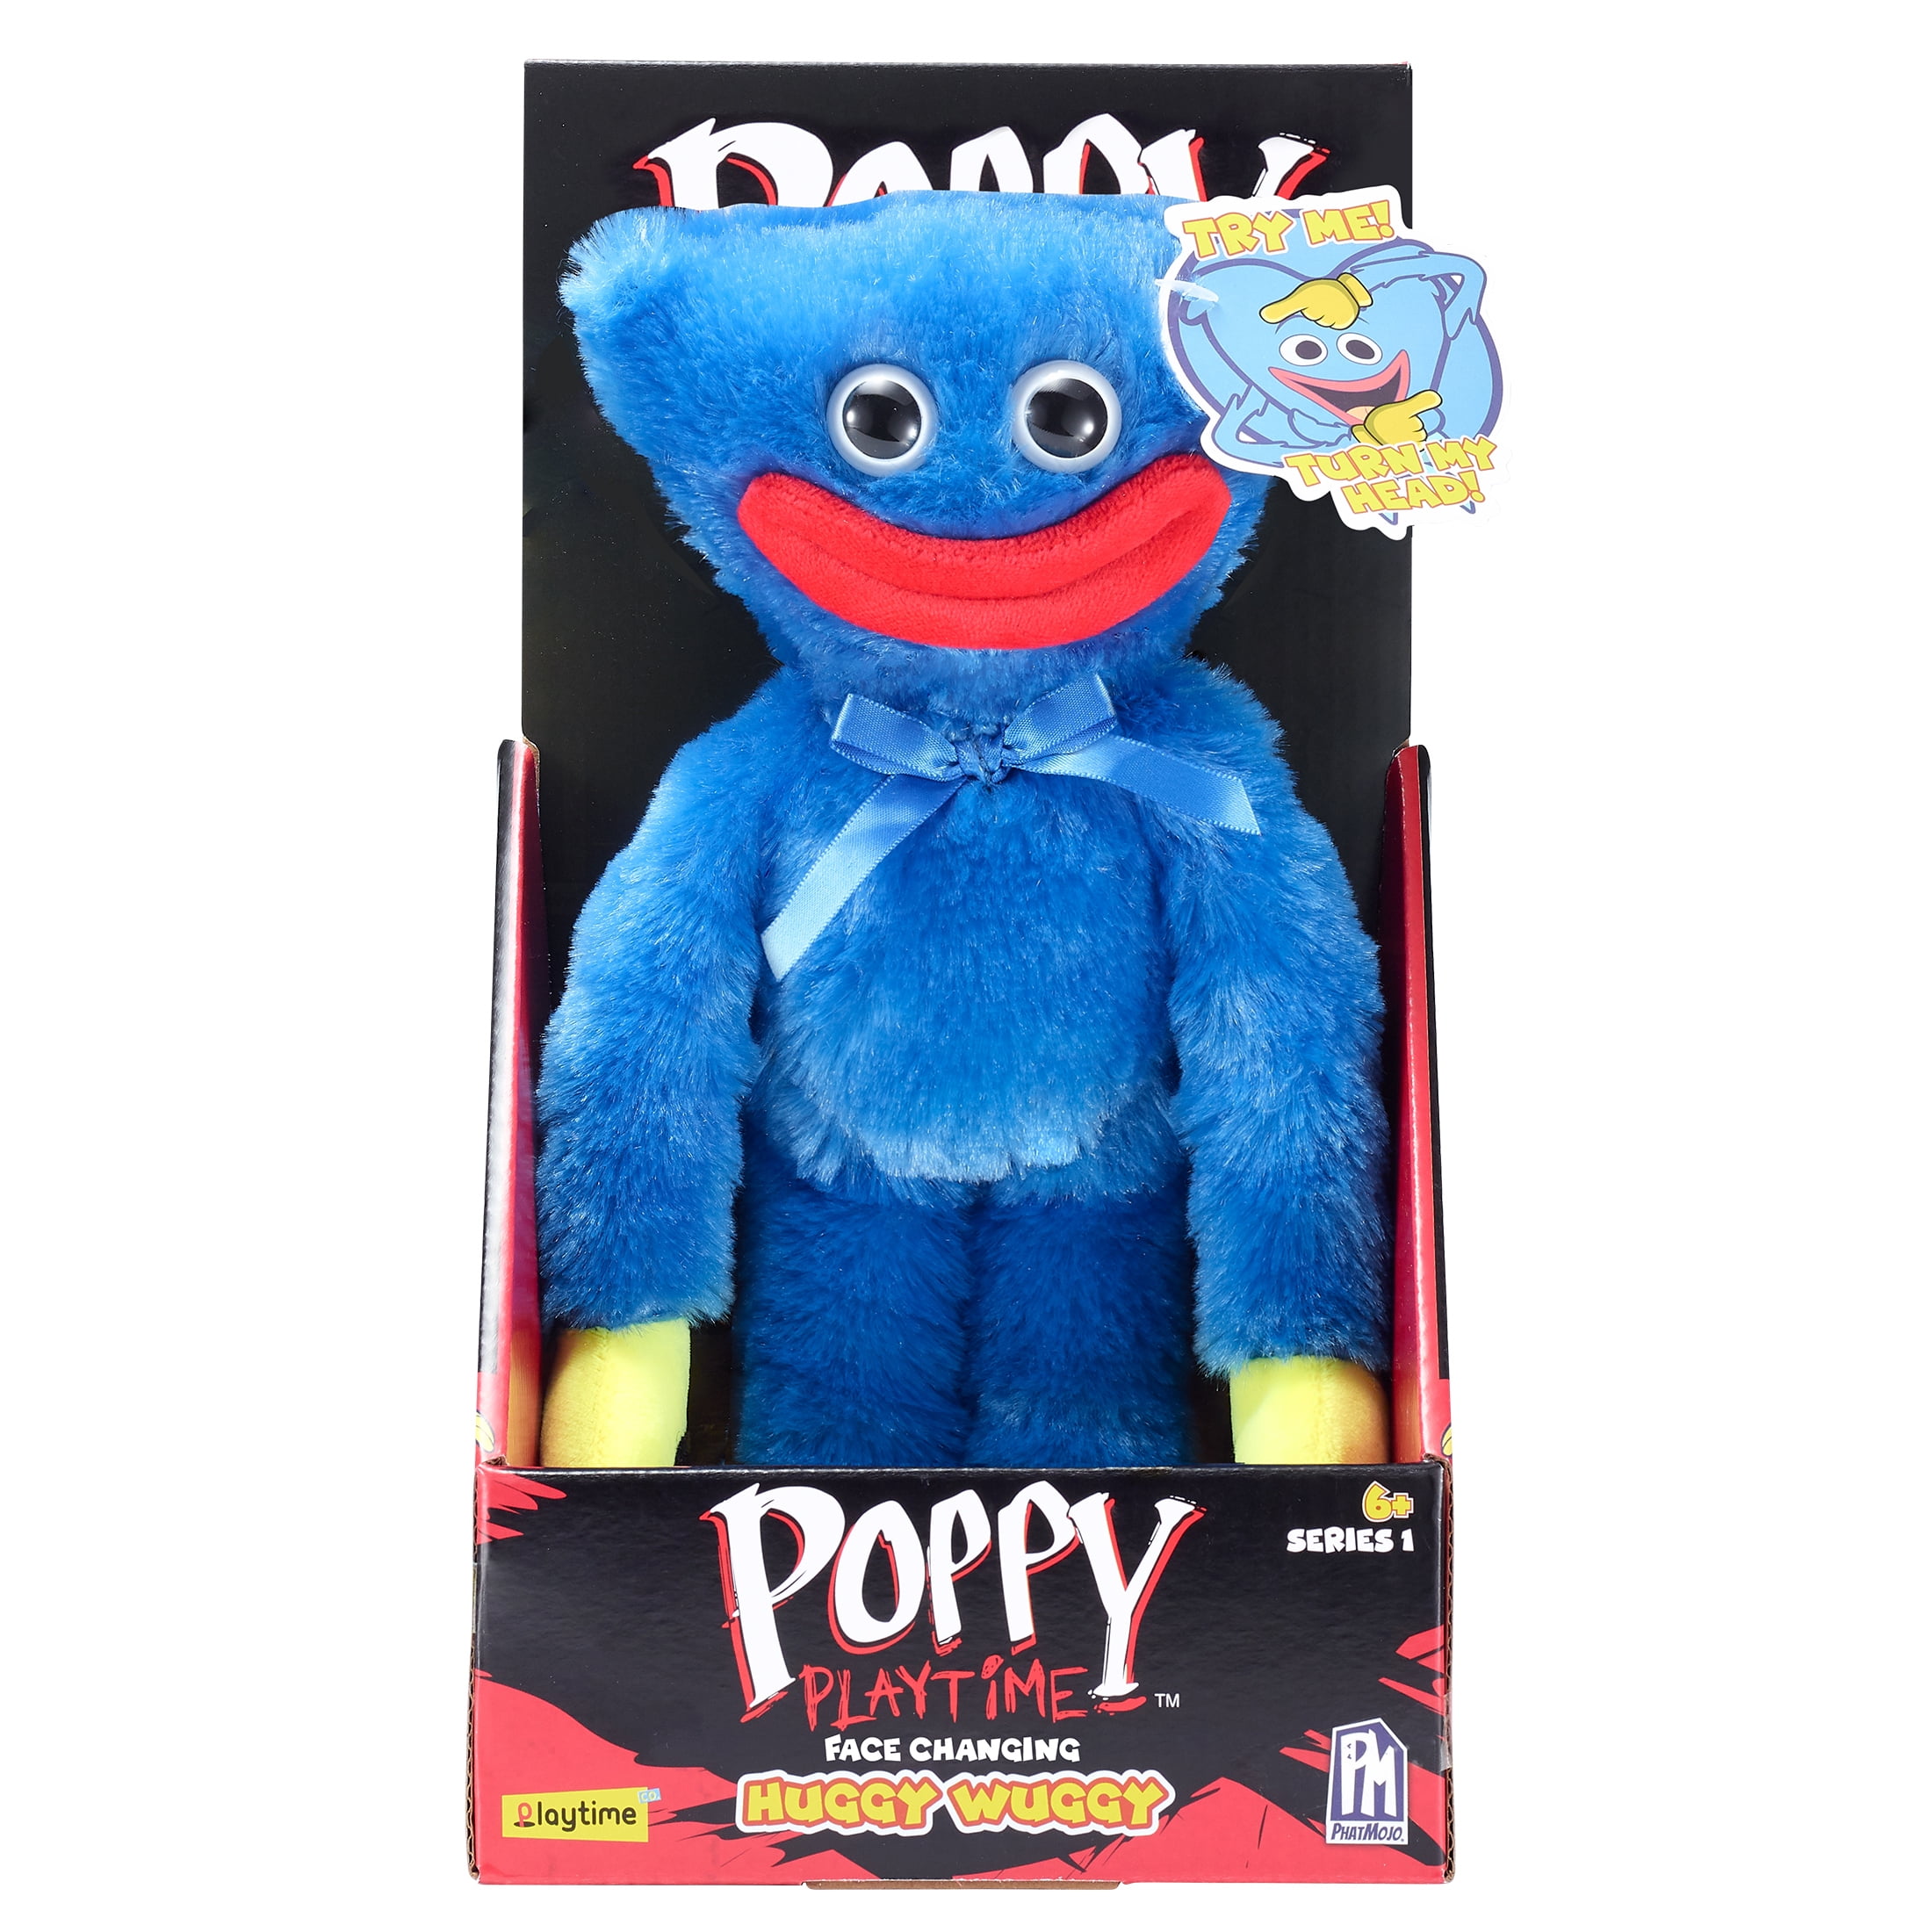 Poppy Playtime Plush 14 inch Face-Changing Huggy Wuggy (Series 1